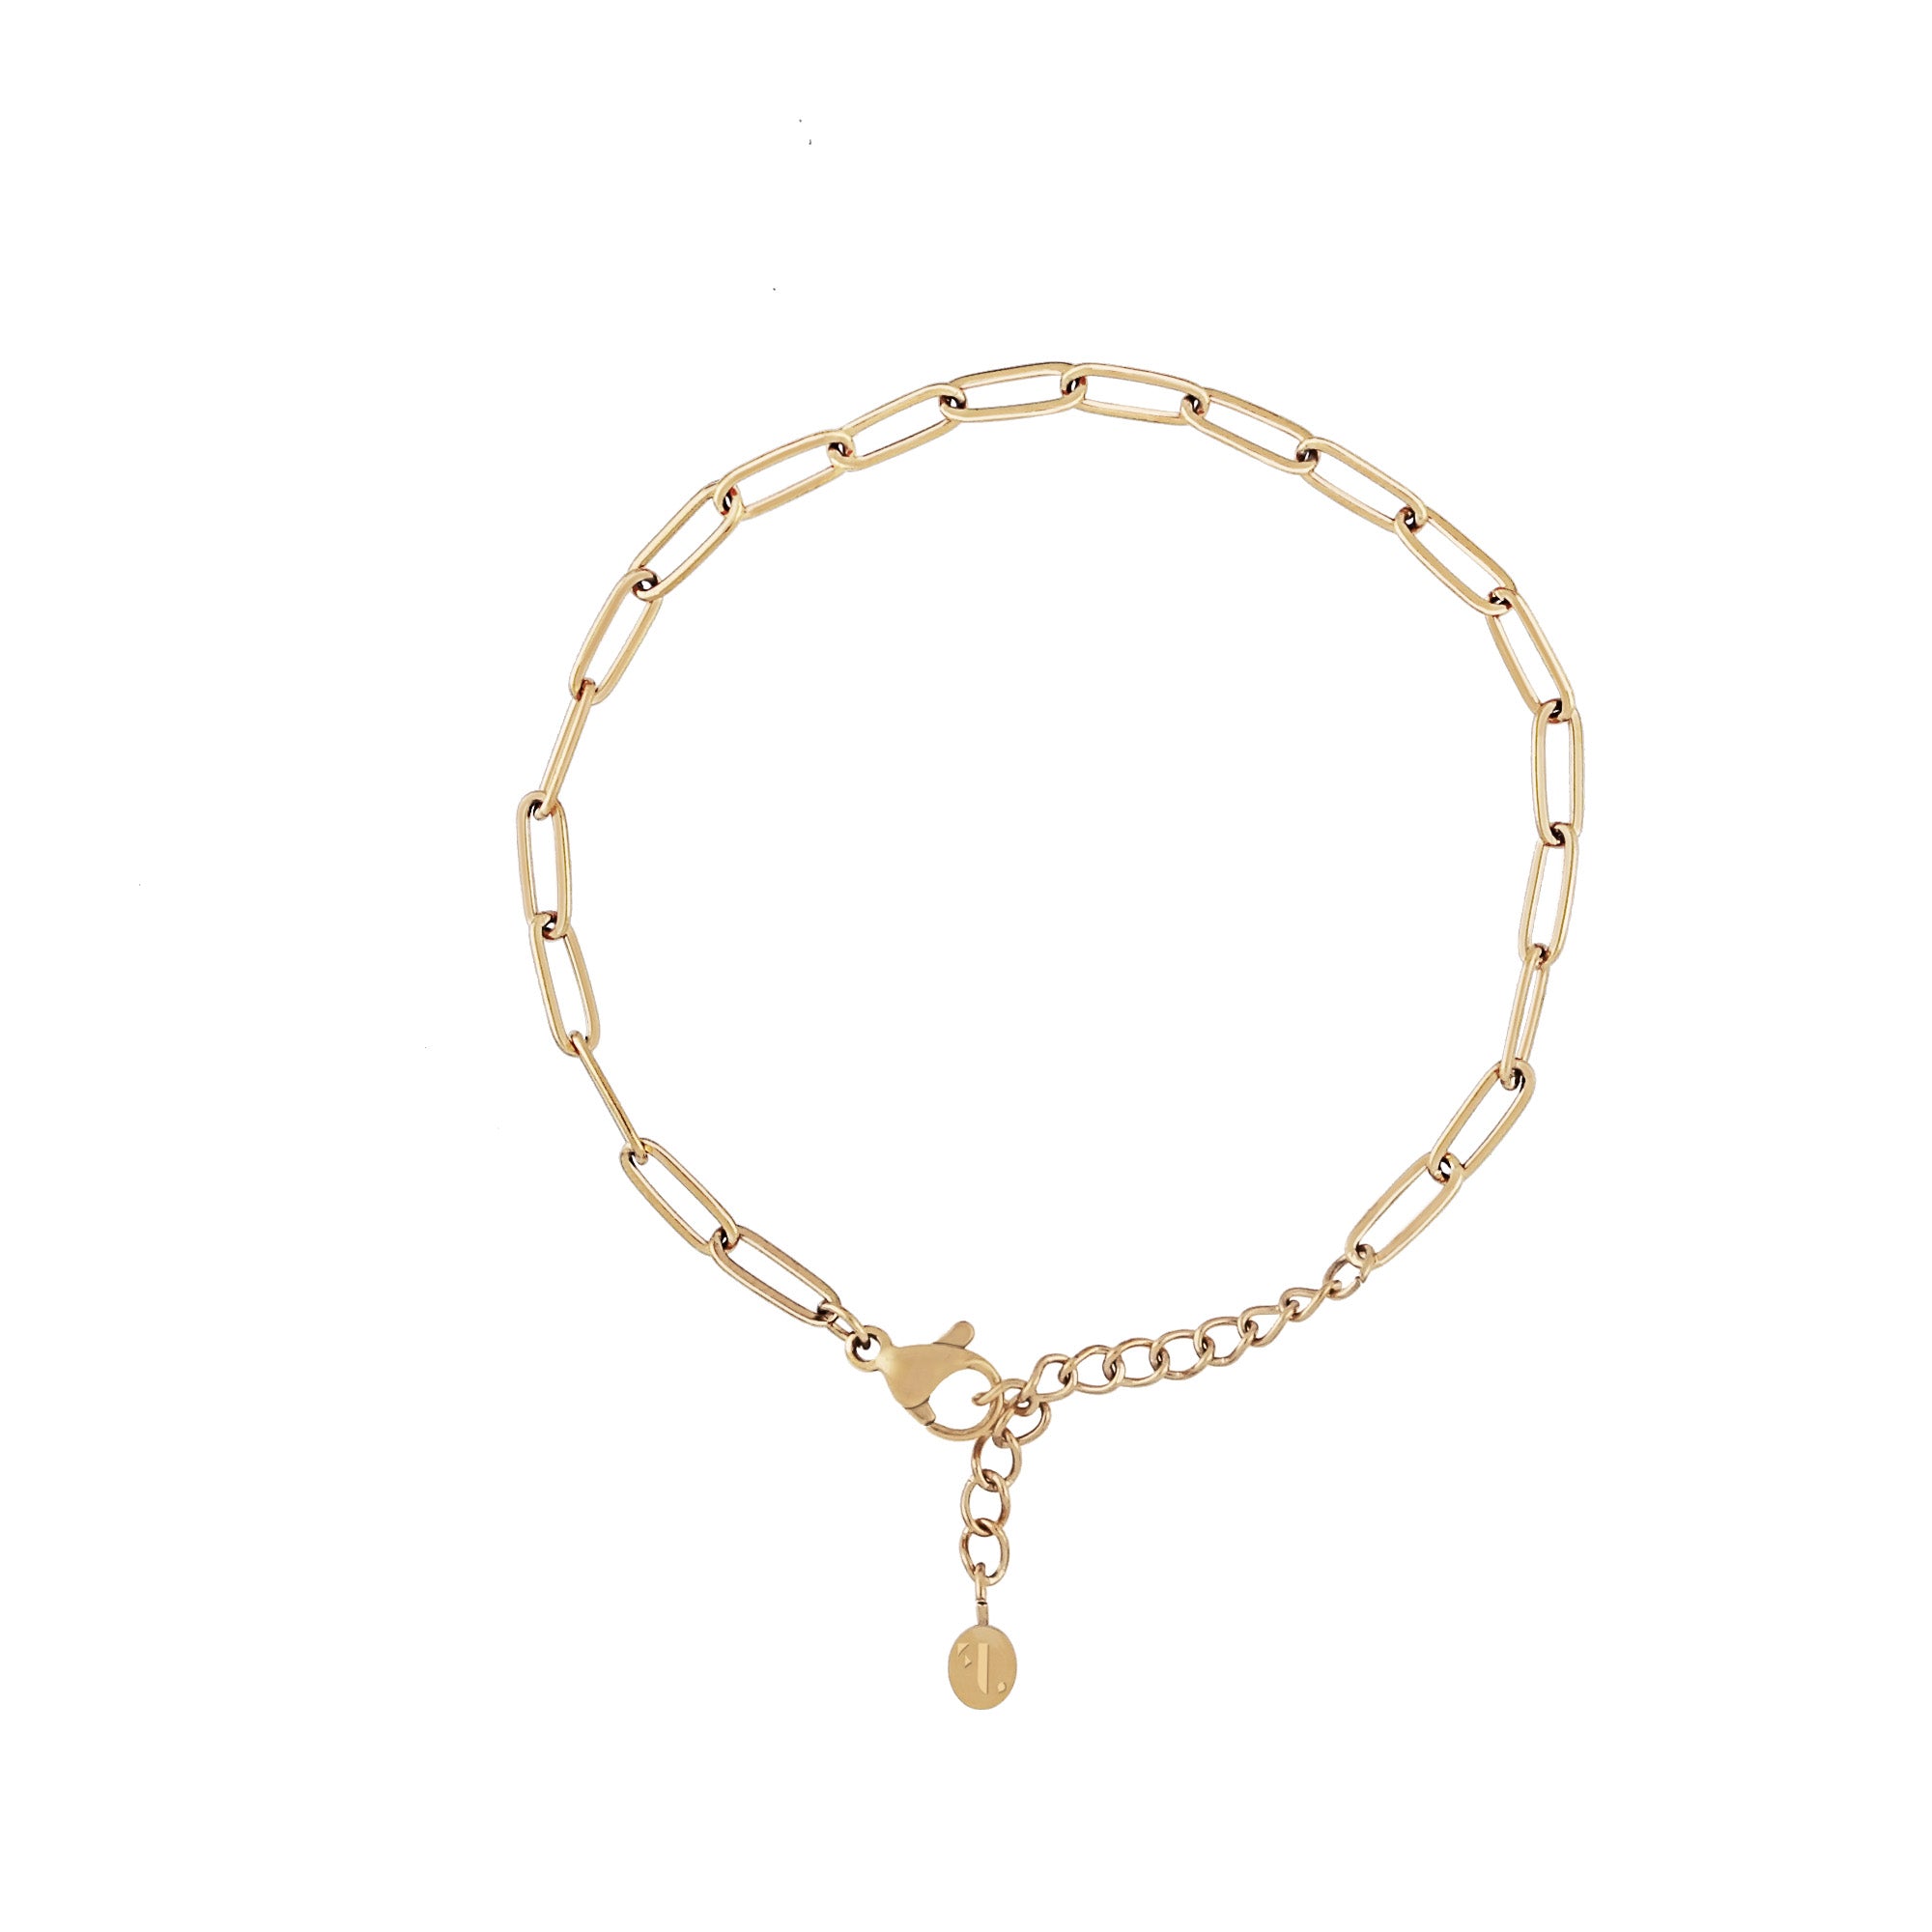 Maritsa bracelet by Five Jwlry for women, featuring an adjustable gold paperclip link chain ranging from 16cm to 20cm with its extension.